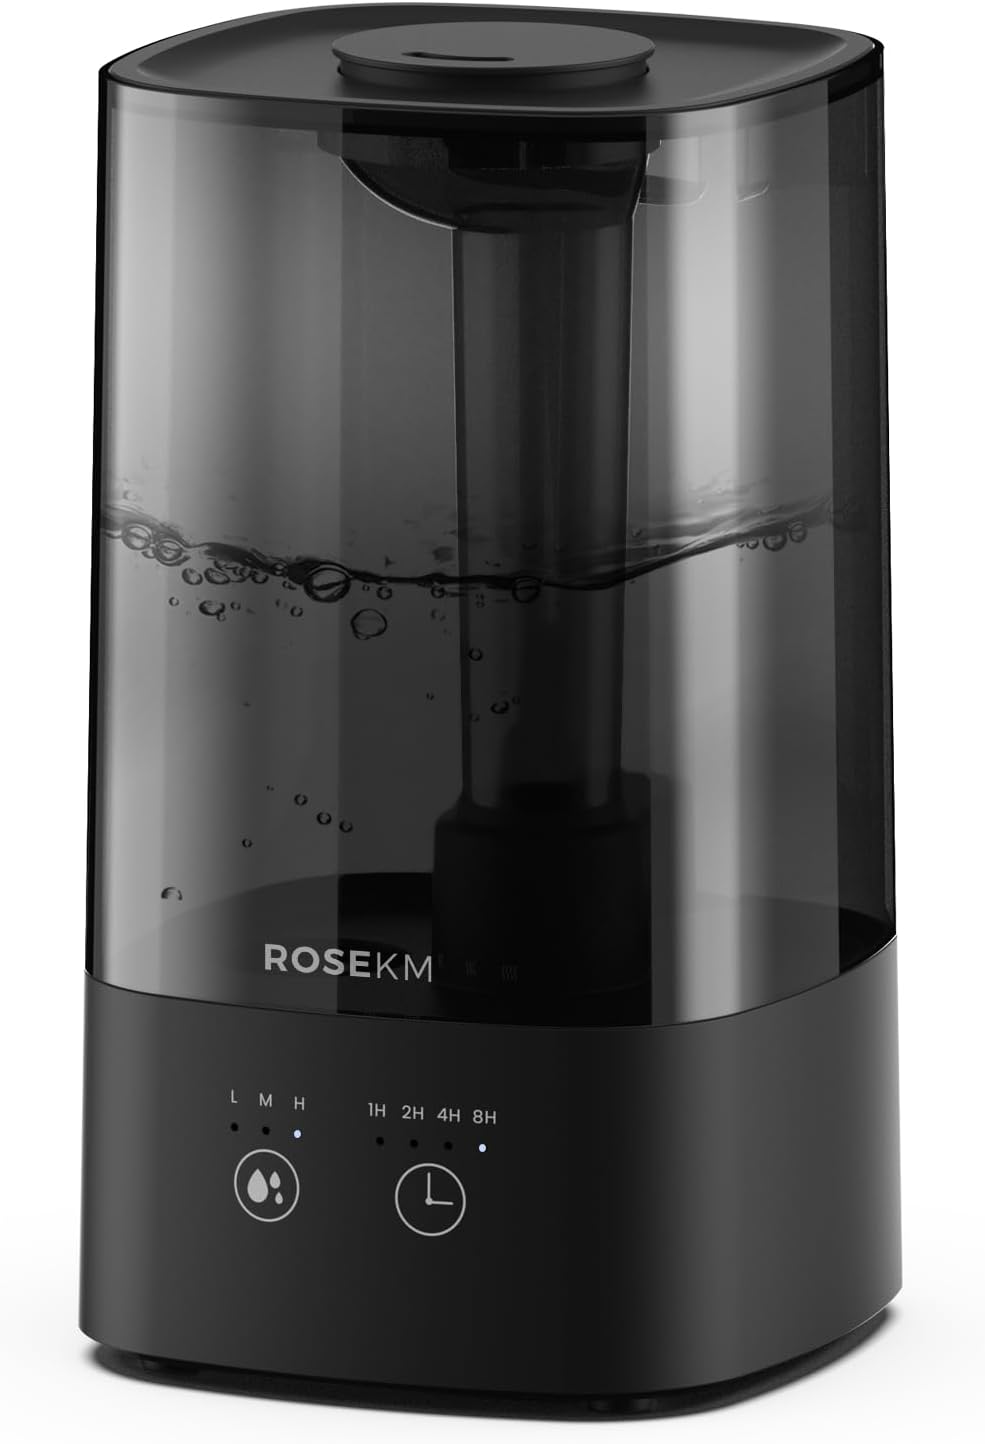 ROSEKM Humidifiers for Bedroom (1.1L), Small Cool Mist Humidifier for Home Plant and Baby Nursery, Quiet Ultrasonic Humidifier with 360° Nozzle, Auto Shut-Off, Filterless, Black